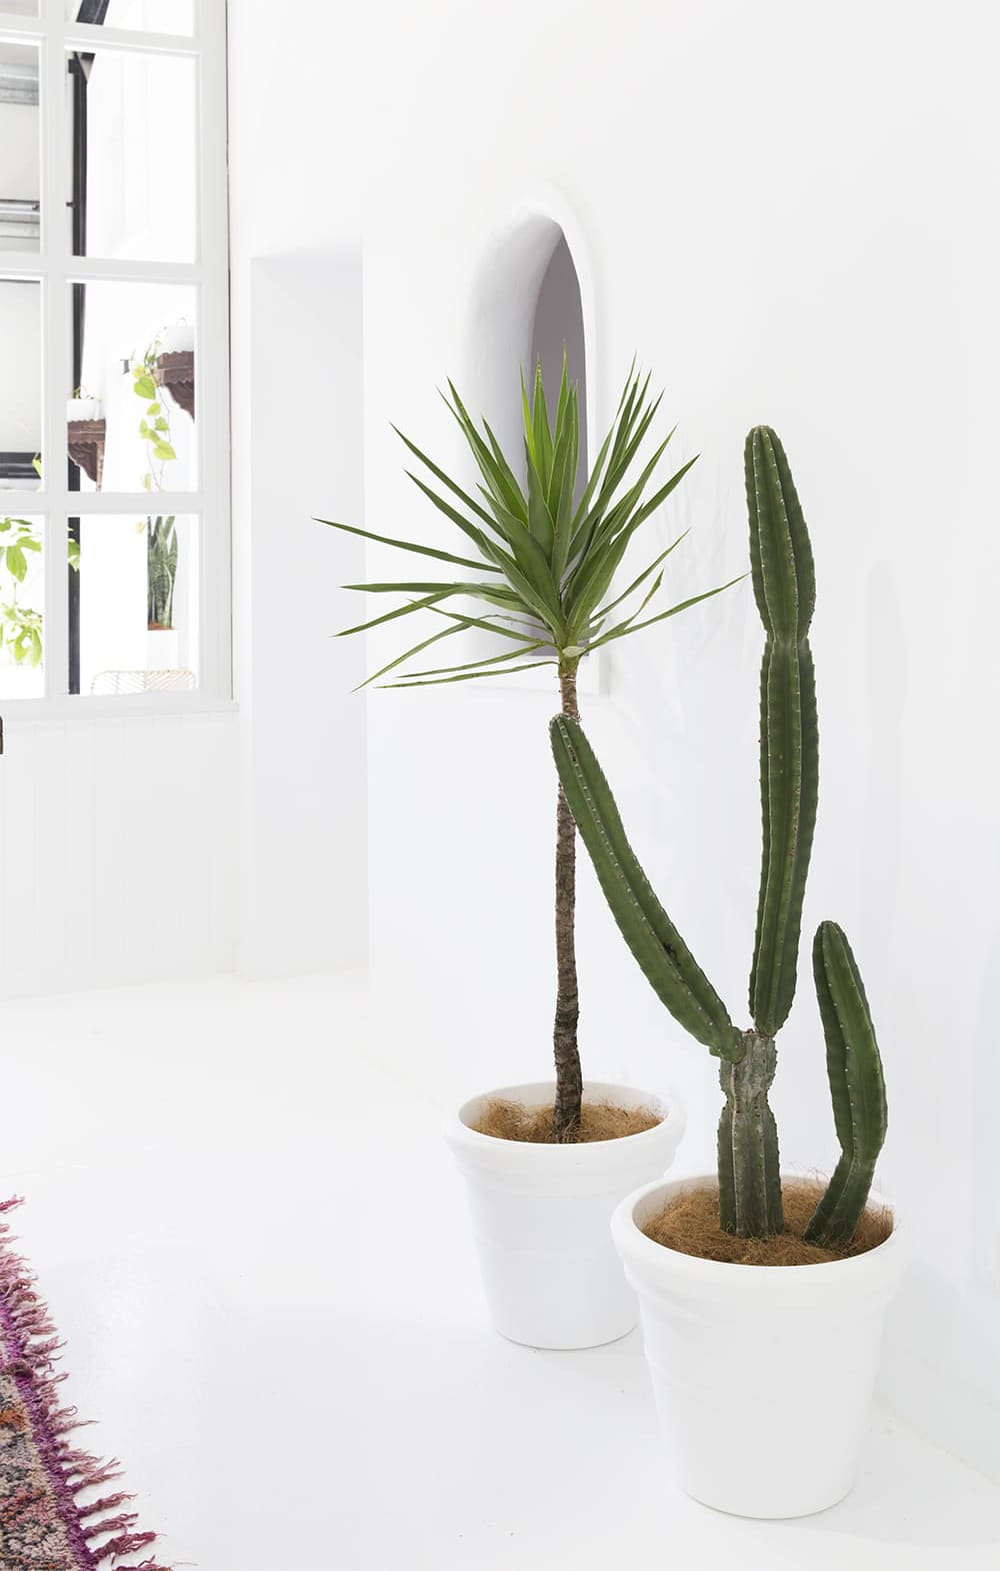 cacti and all white architecture in this dream office space | tour on coco kelley